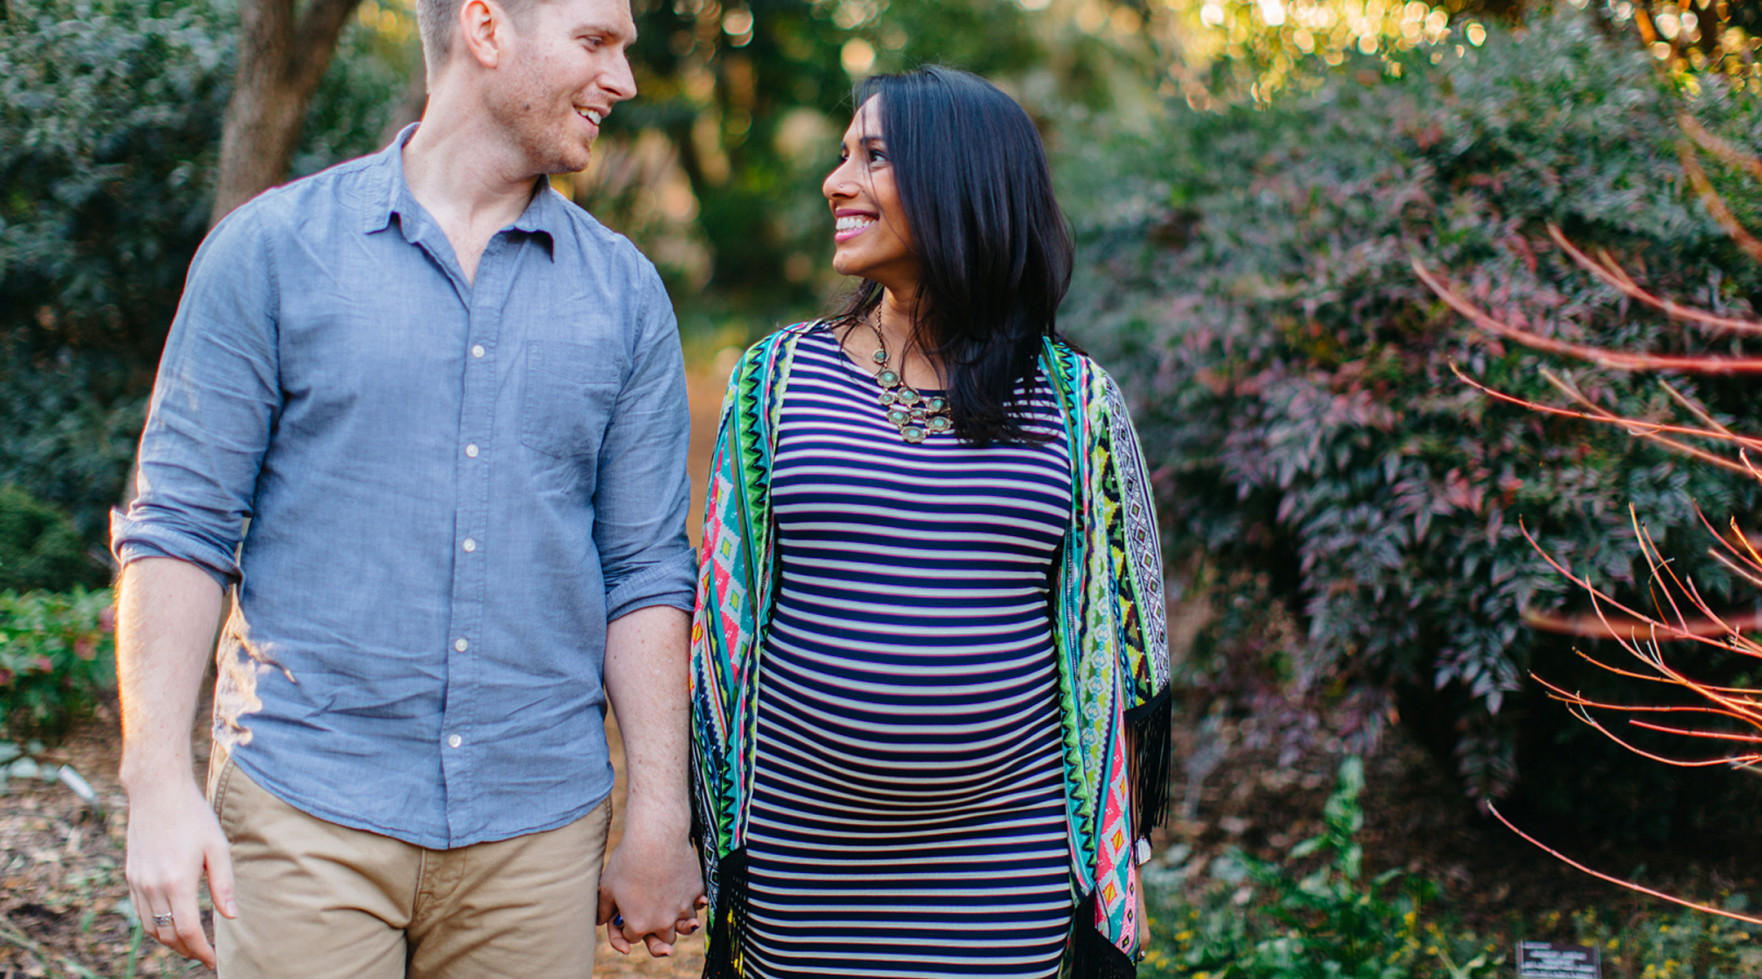 3 Blissfully Easy Steps to a Successful Fall Maternity Session